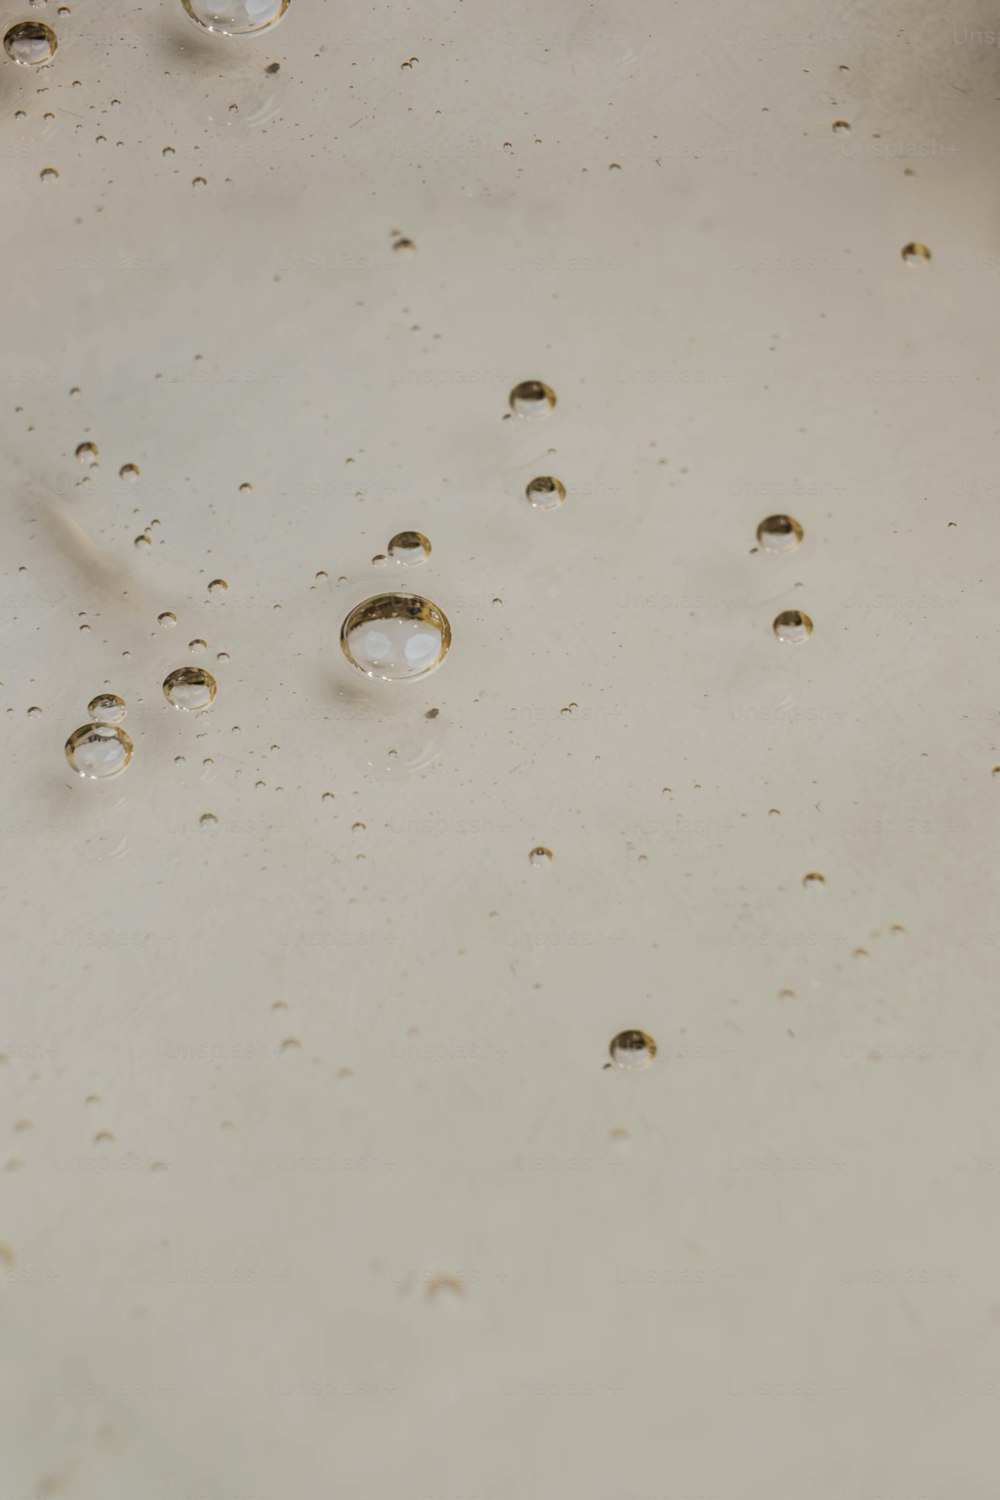 a bunch of water drops on a white surface